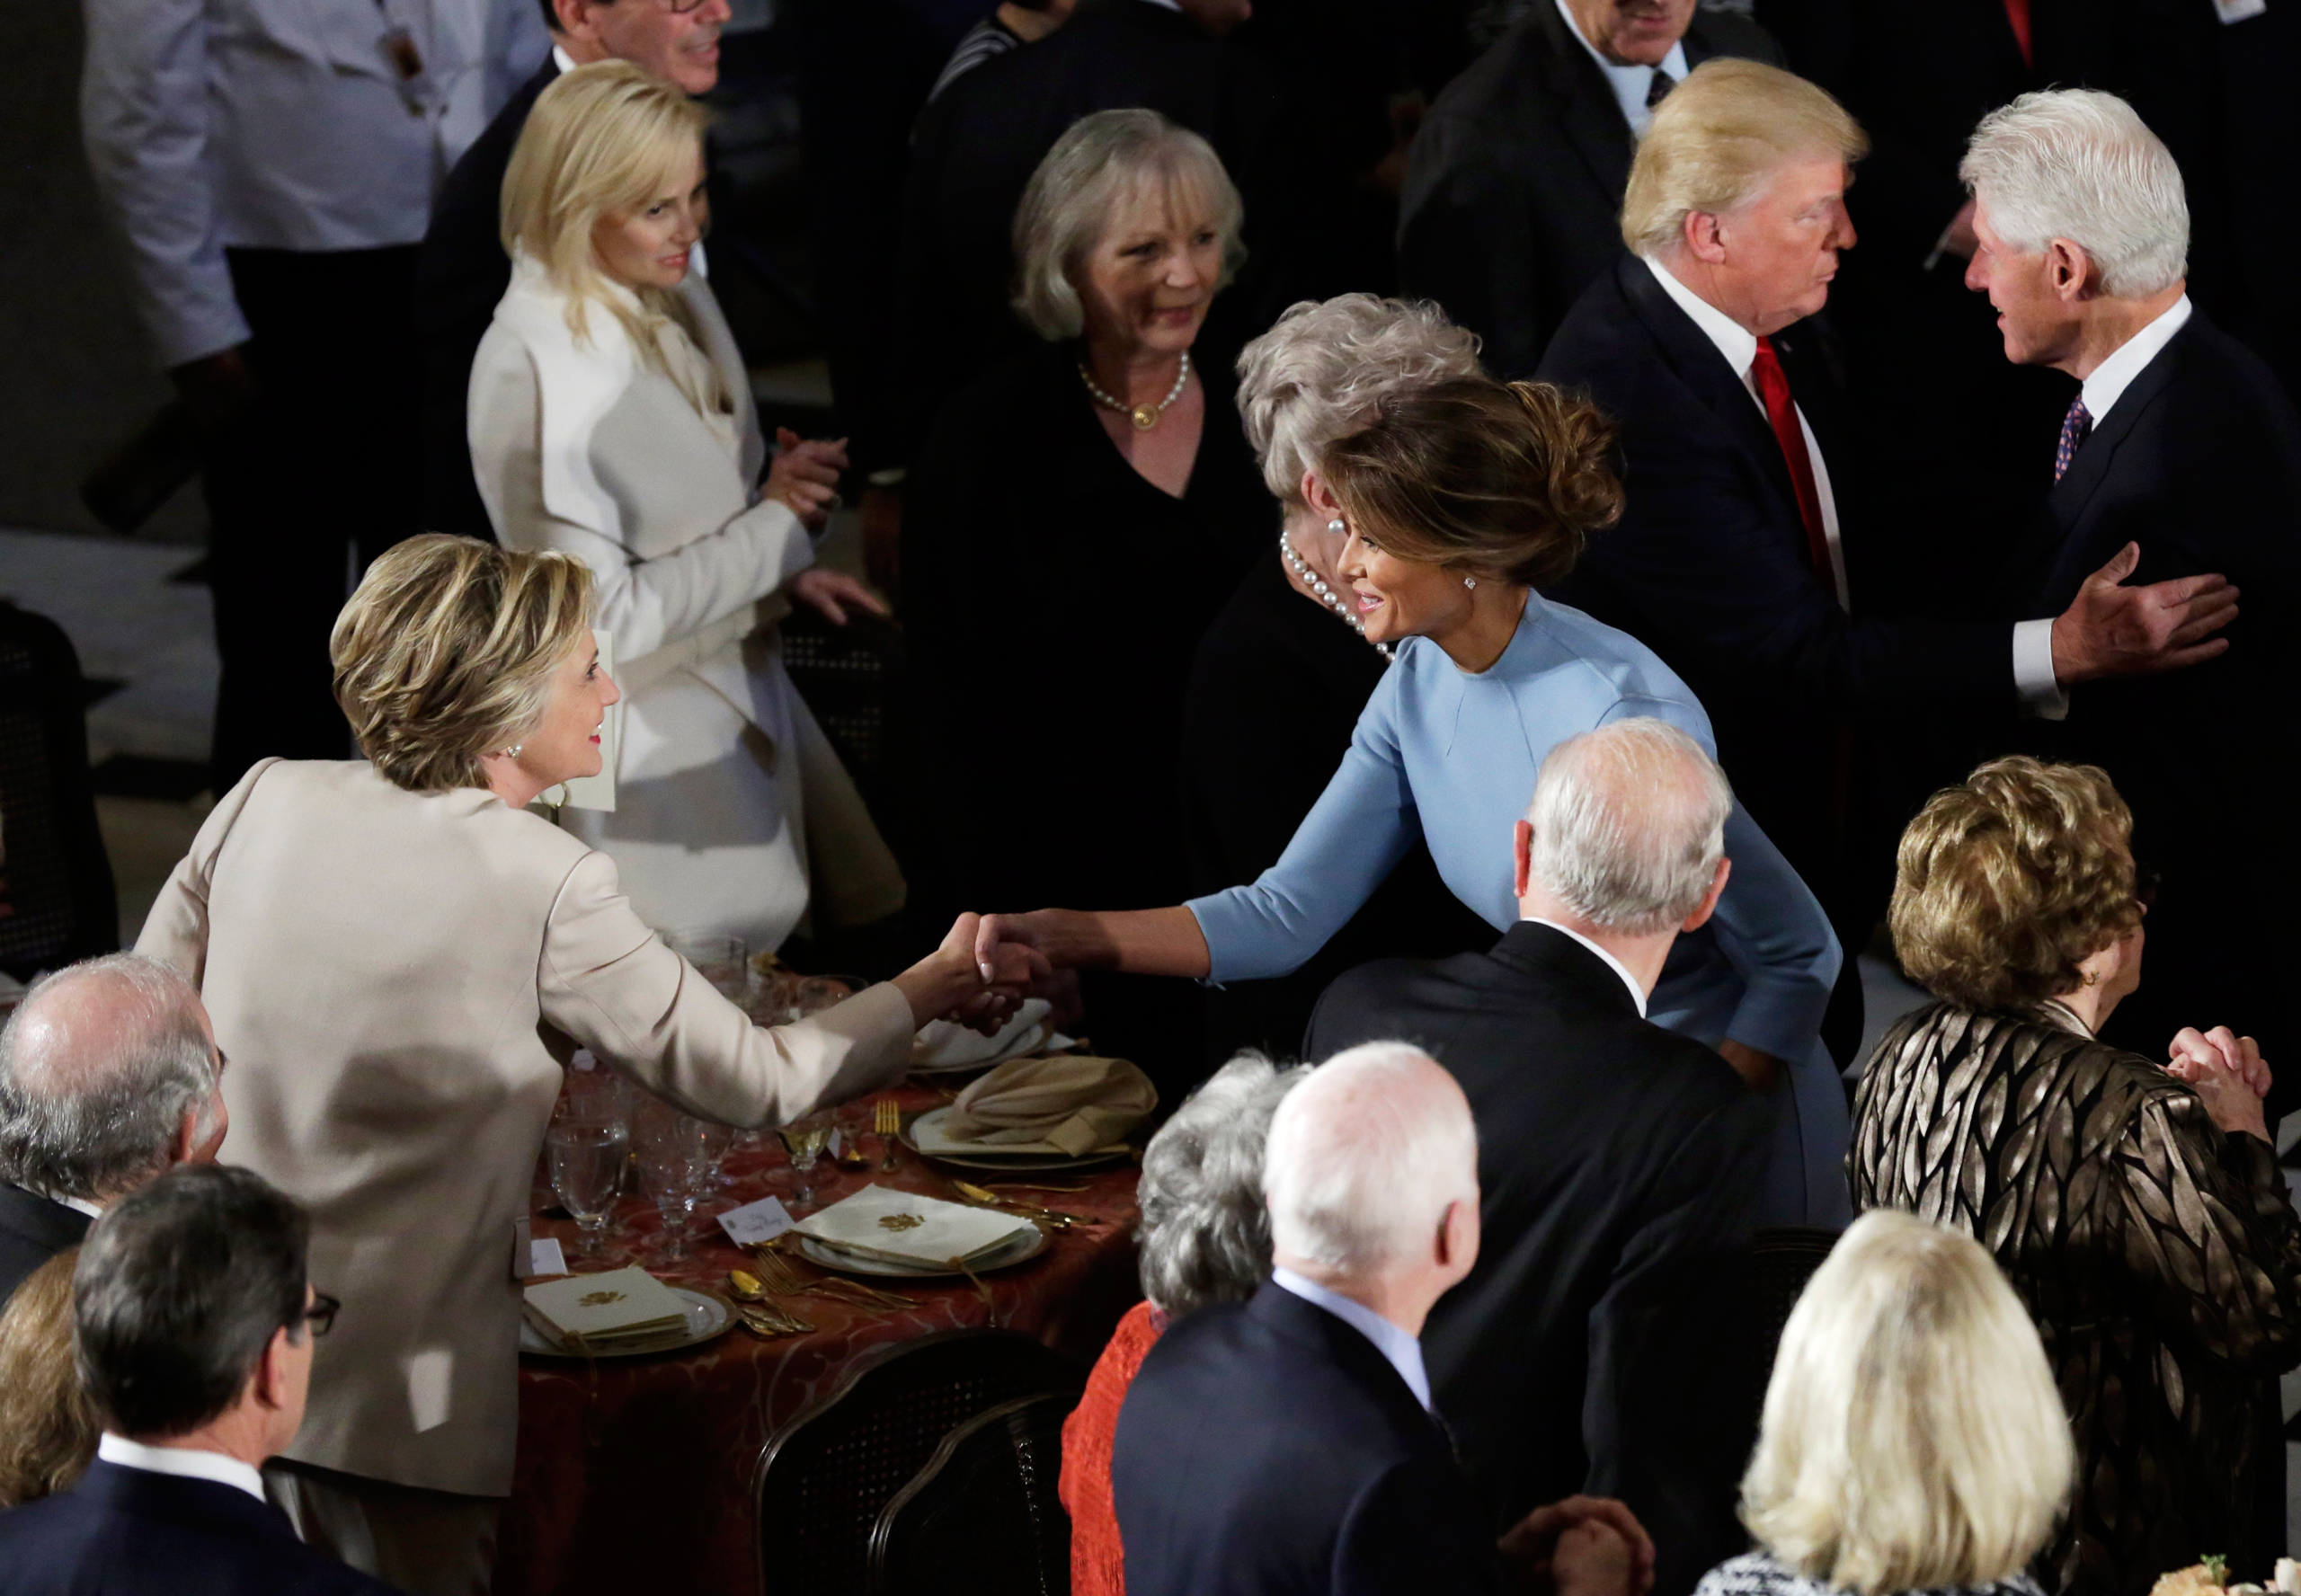 Former Democratic U.S. presidential nominee Hillary Clinton greets First lady Melania Trump as her husband Bill Clinton speaks with President Donald Trump during the Inaugural luncheon at the National Statuary Hall in Washington on Jan. 20, 2017. (Yuri Gripas—Reuters)